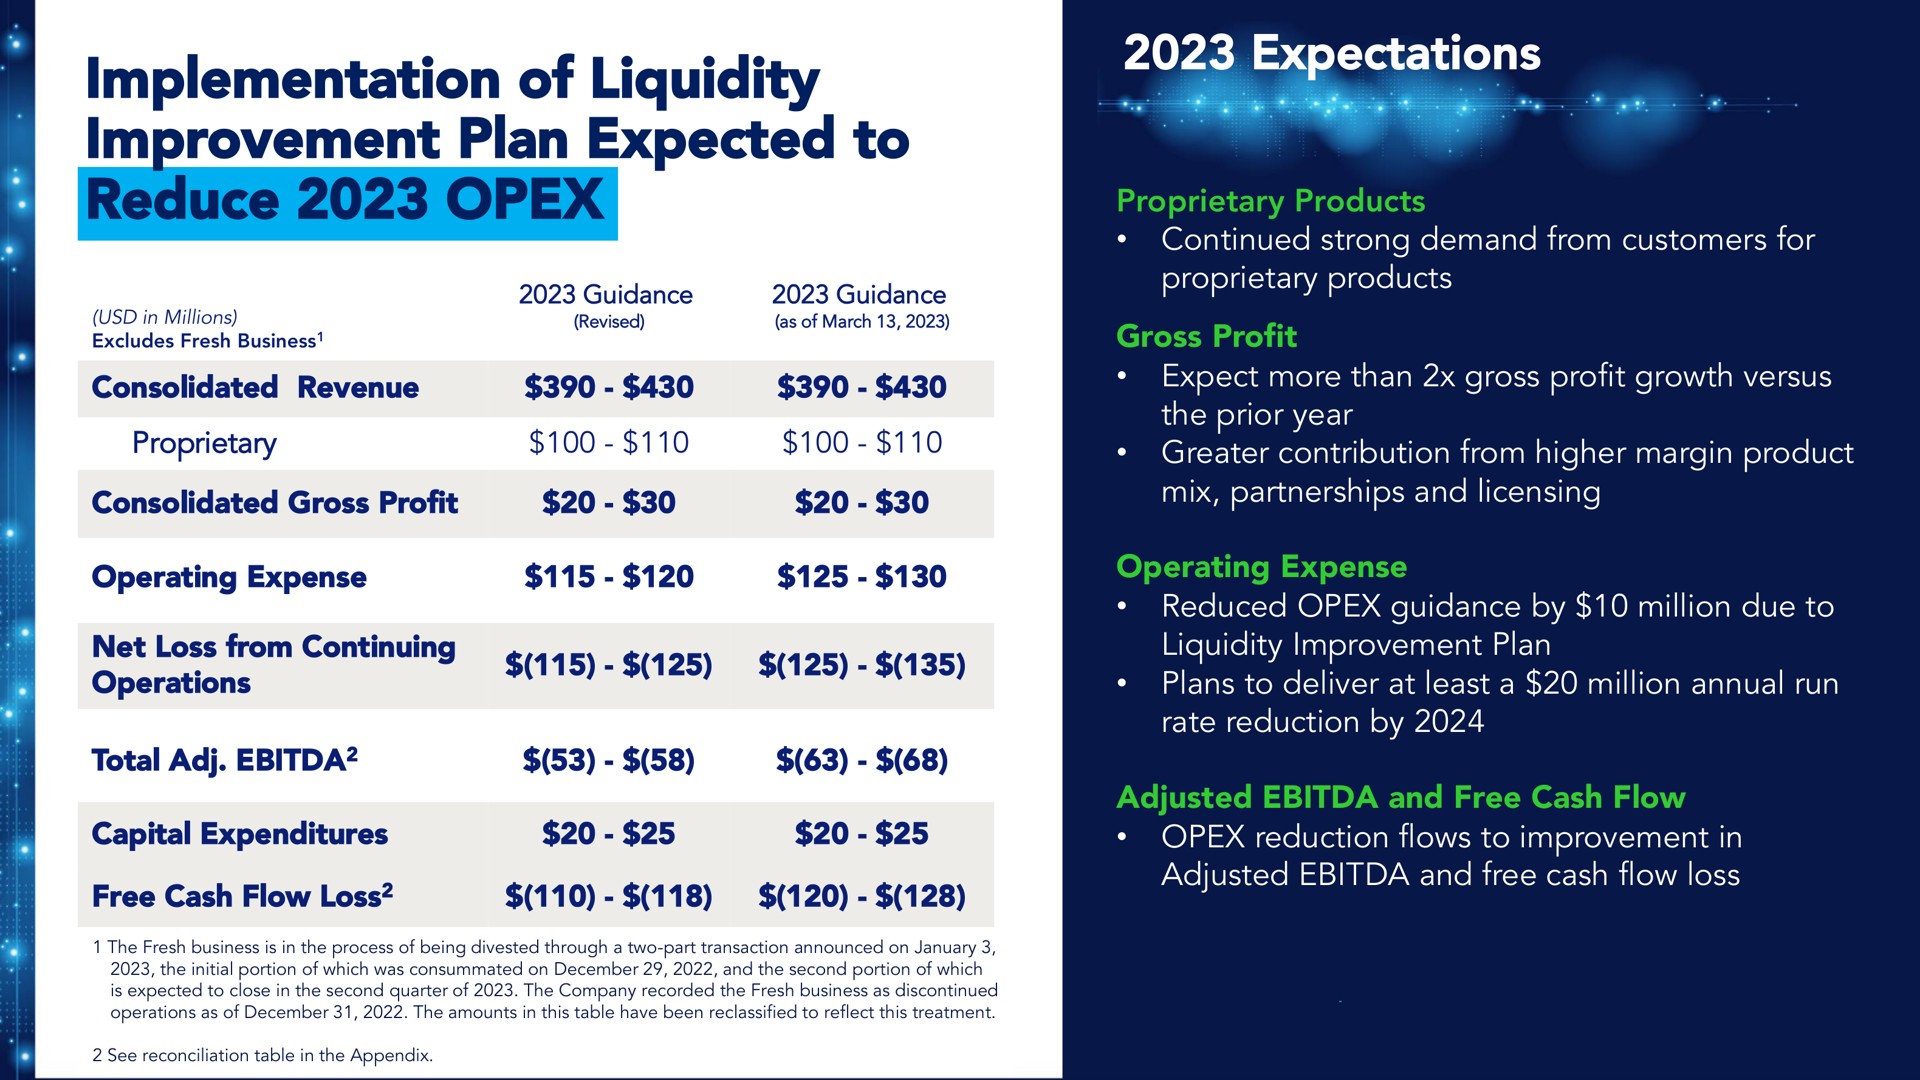 implementation of liquidity improvement plan expected to reduce expectations capital expenditures reduction flows in | Benson Hill